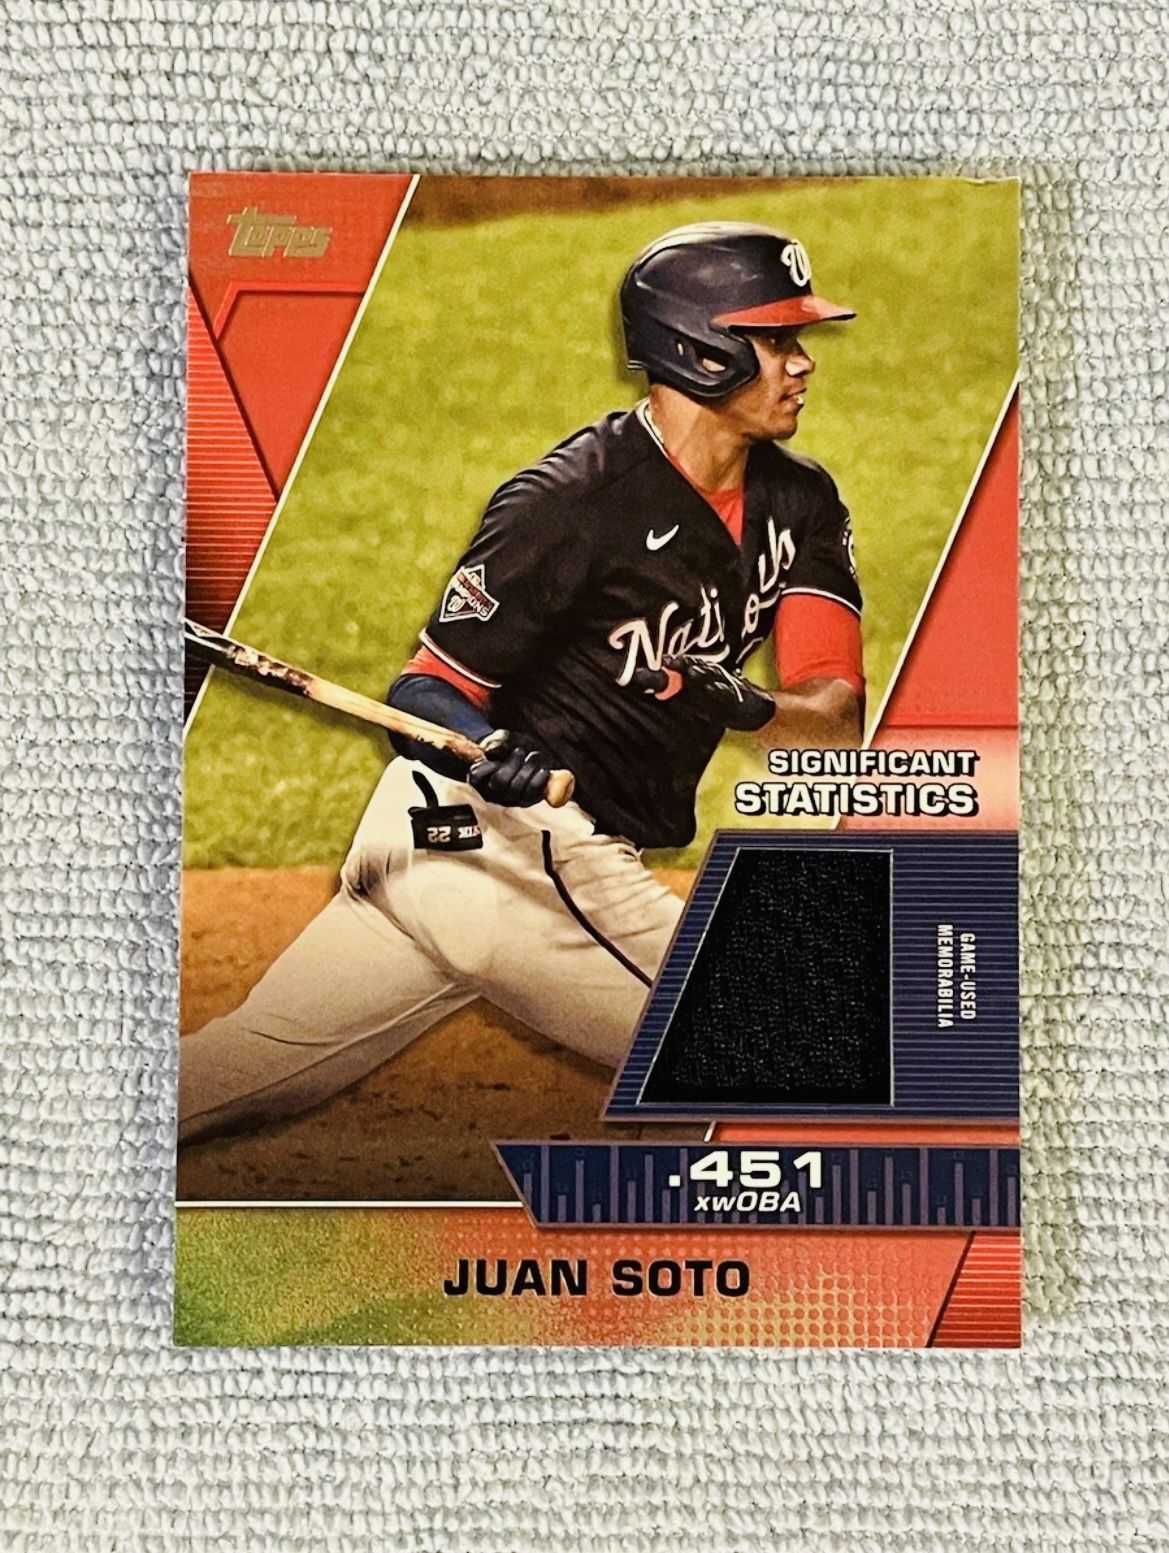 Juan Soto 2021 Topps Series 2 Significant Statistics Jersey Patch